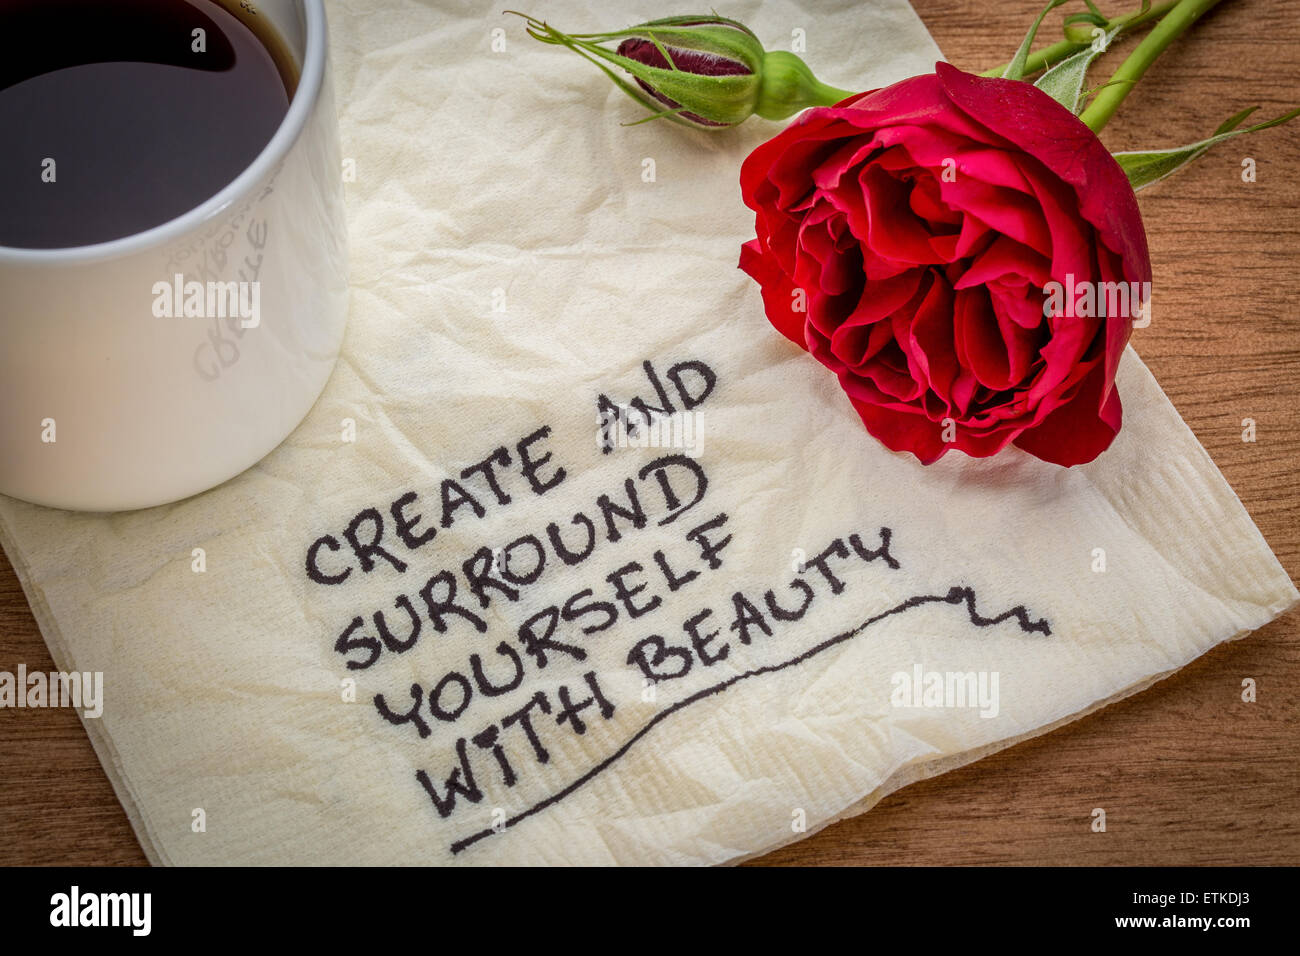 create and surround yourself with beauty - inspirational handwriting on a  napkin with a cup of coffee and red rose Stock Photo - Alamy